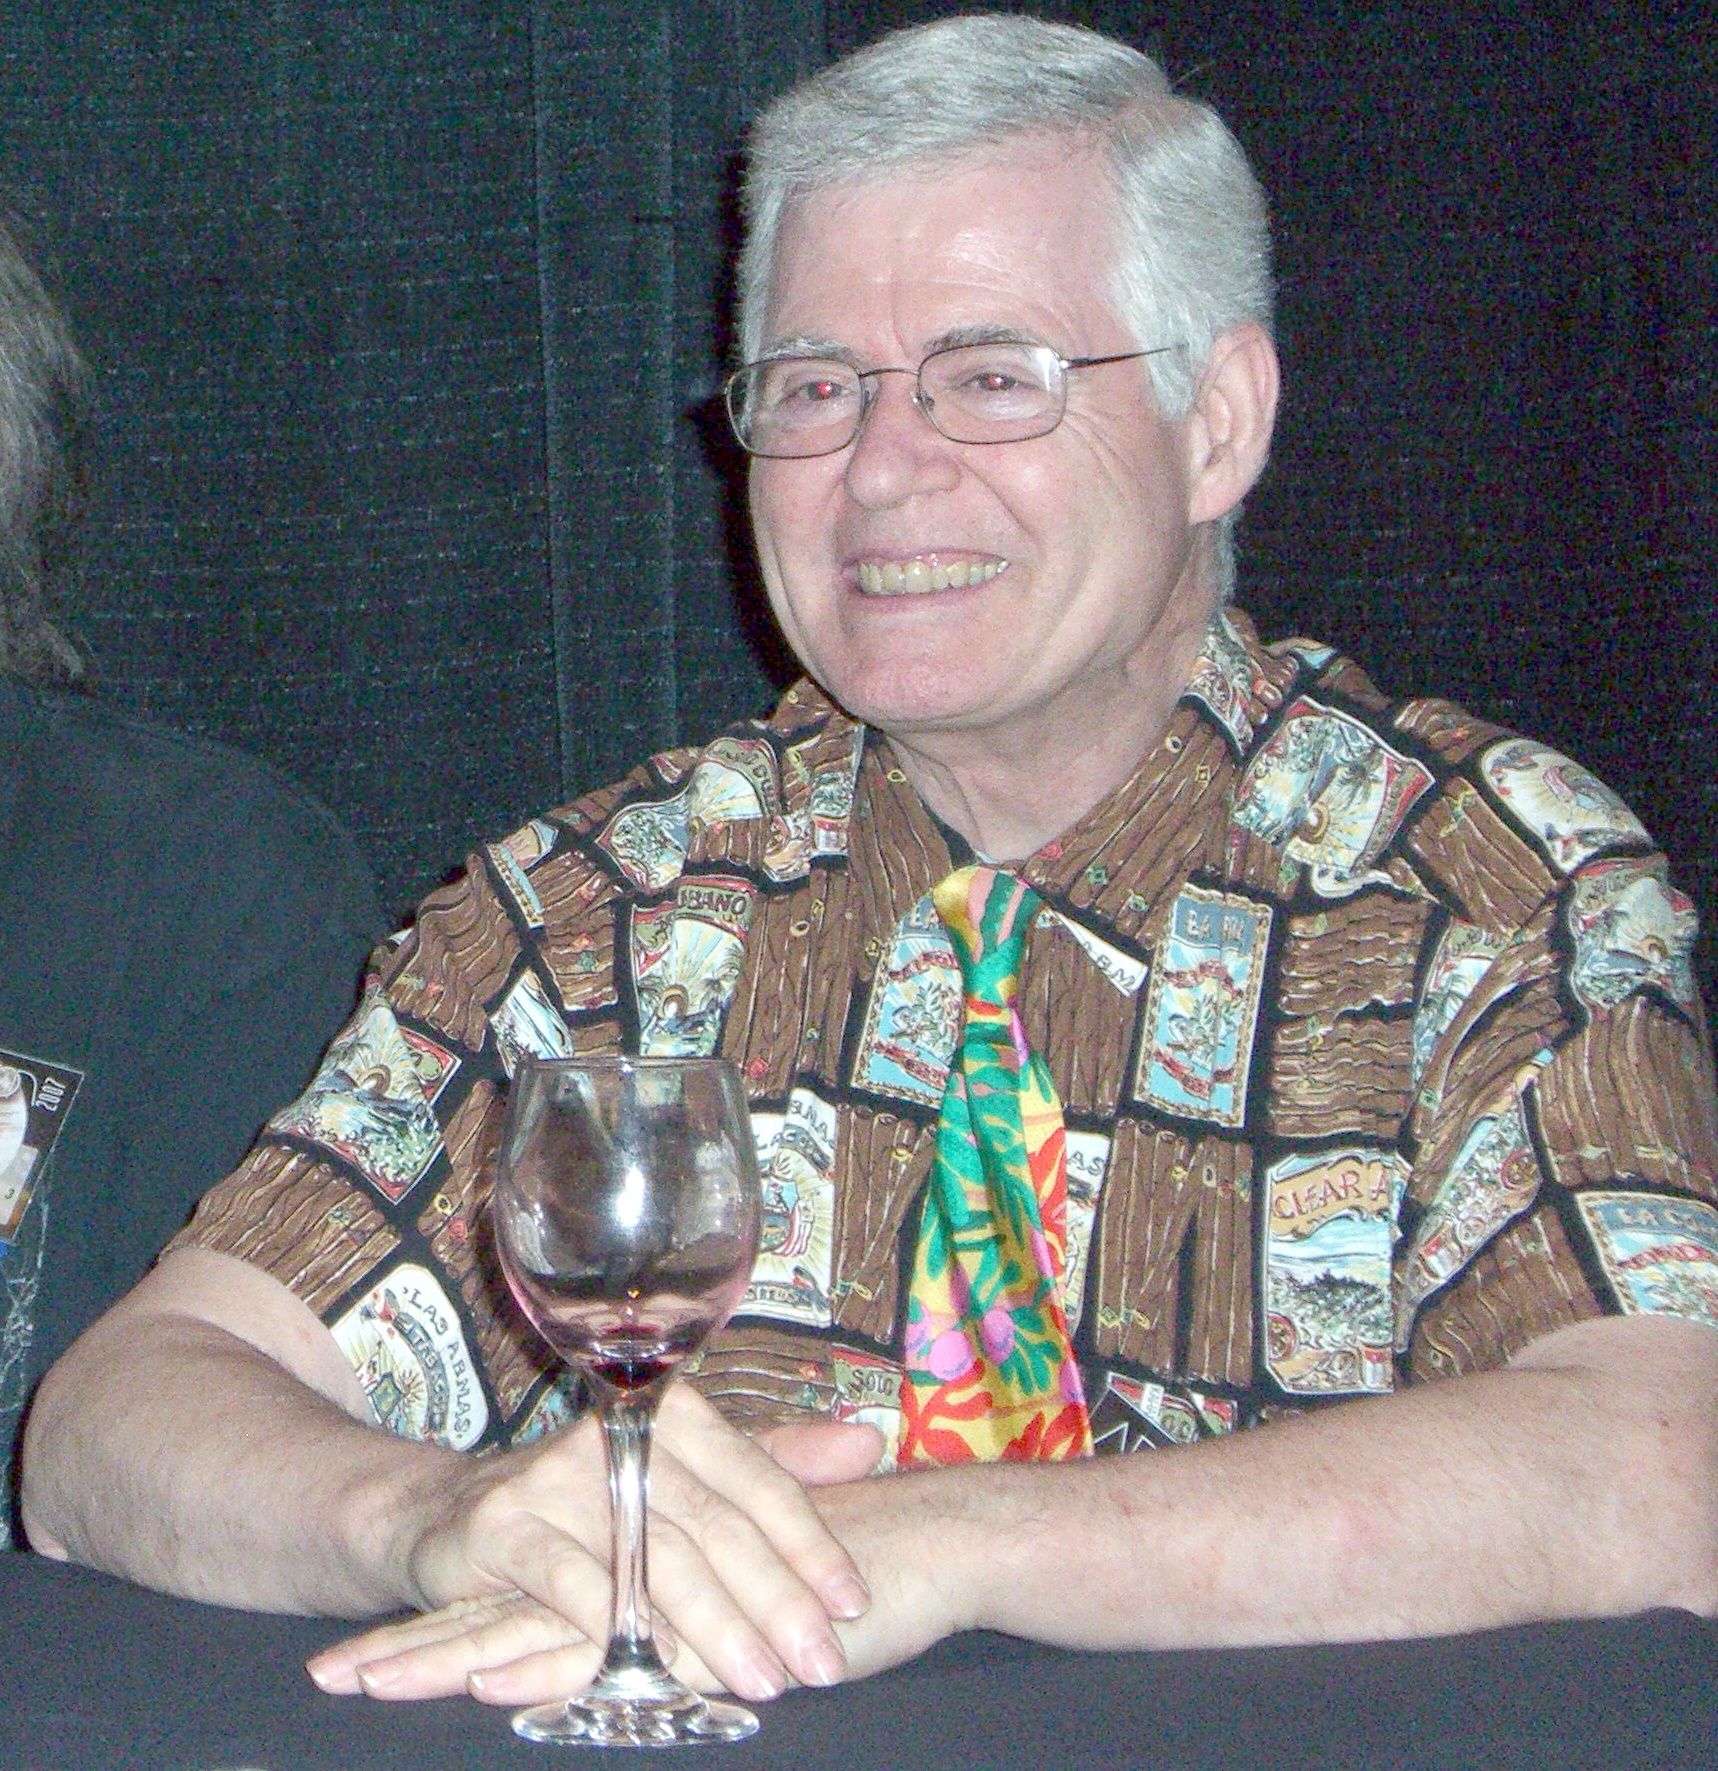 ApolloCon 2007 Opening Ceremony: editor Guest of Honor